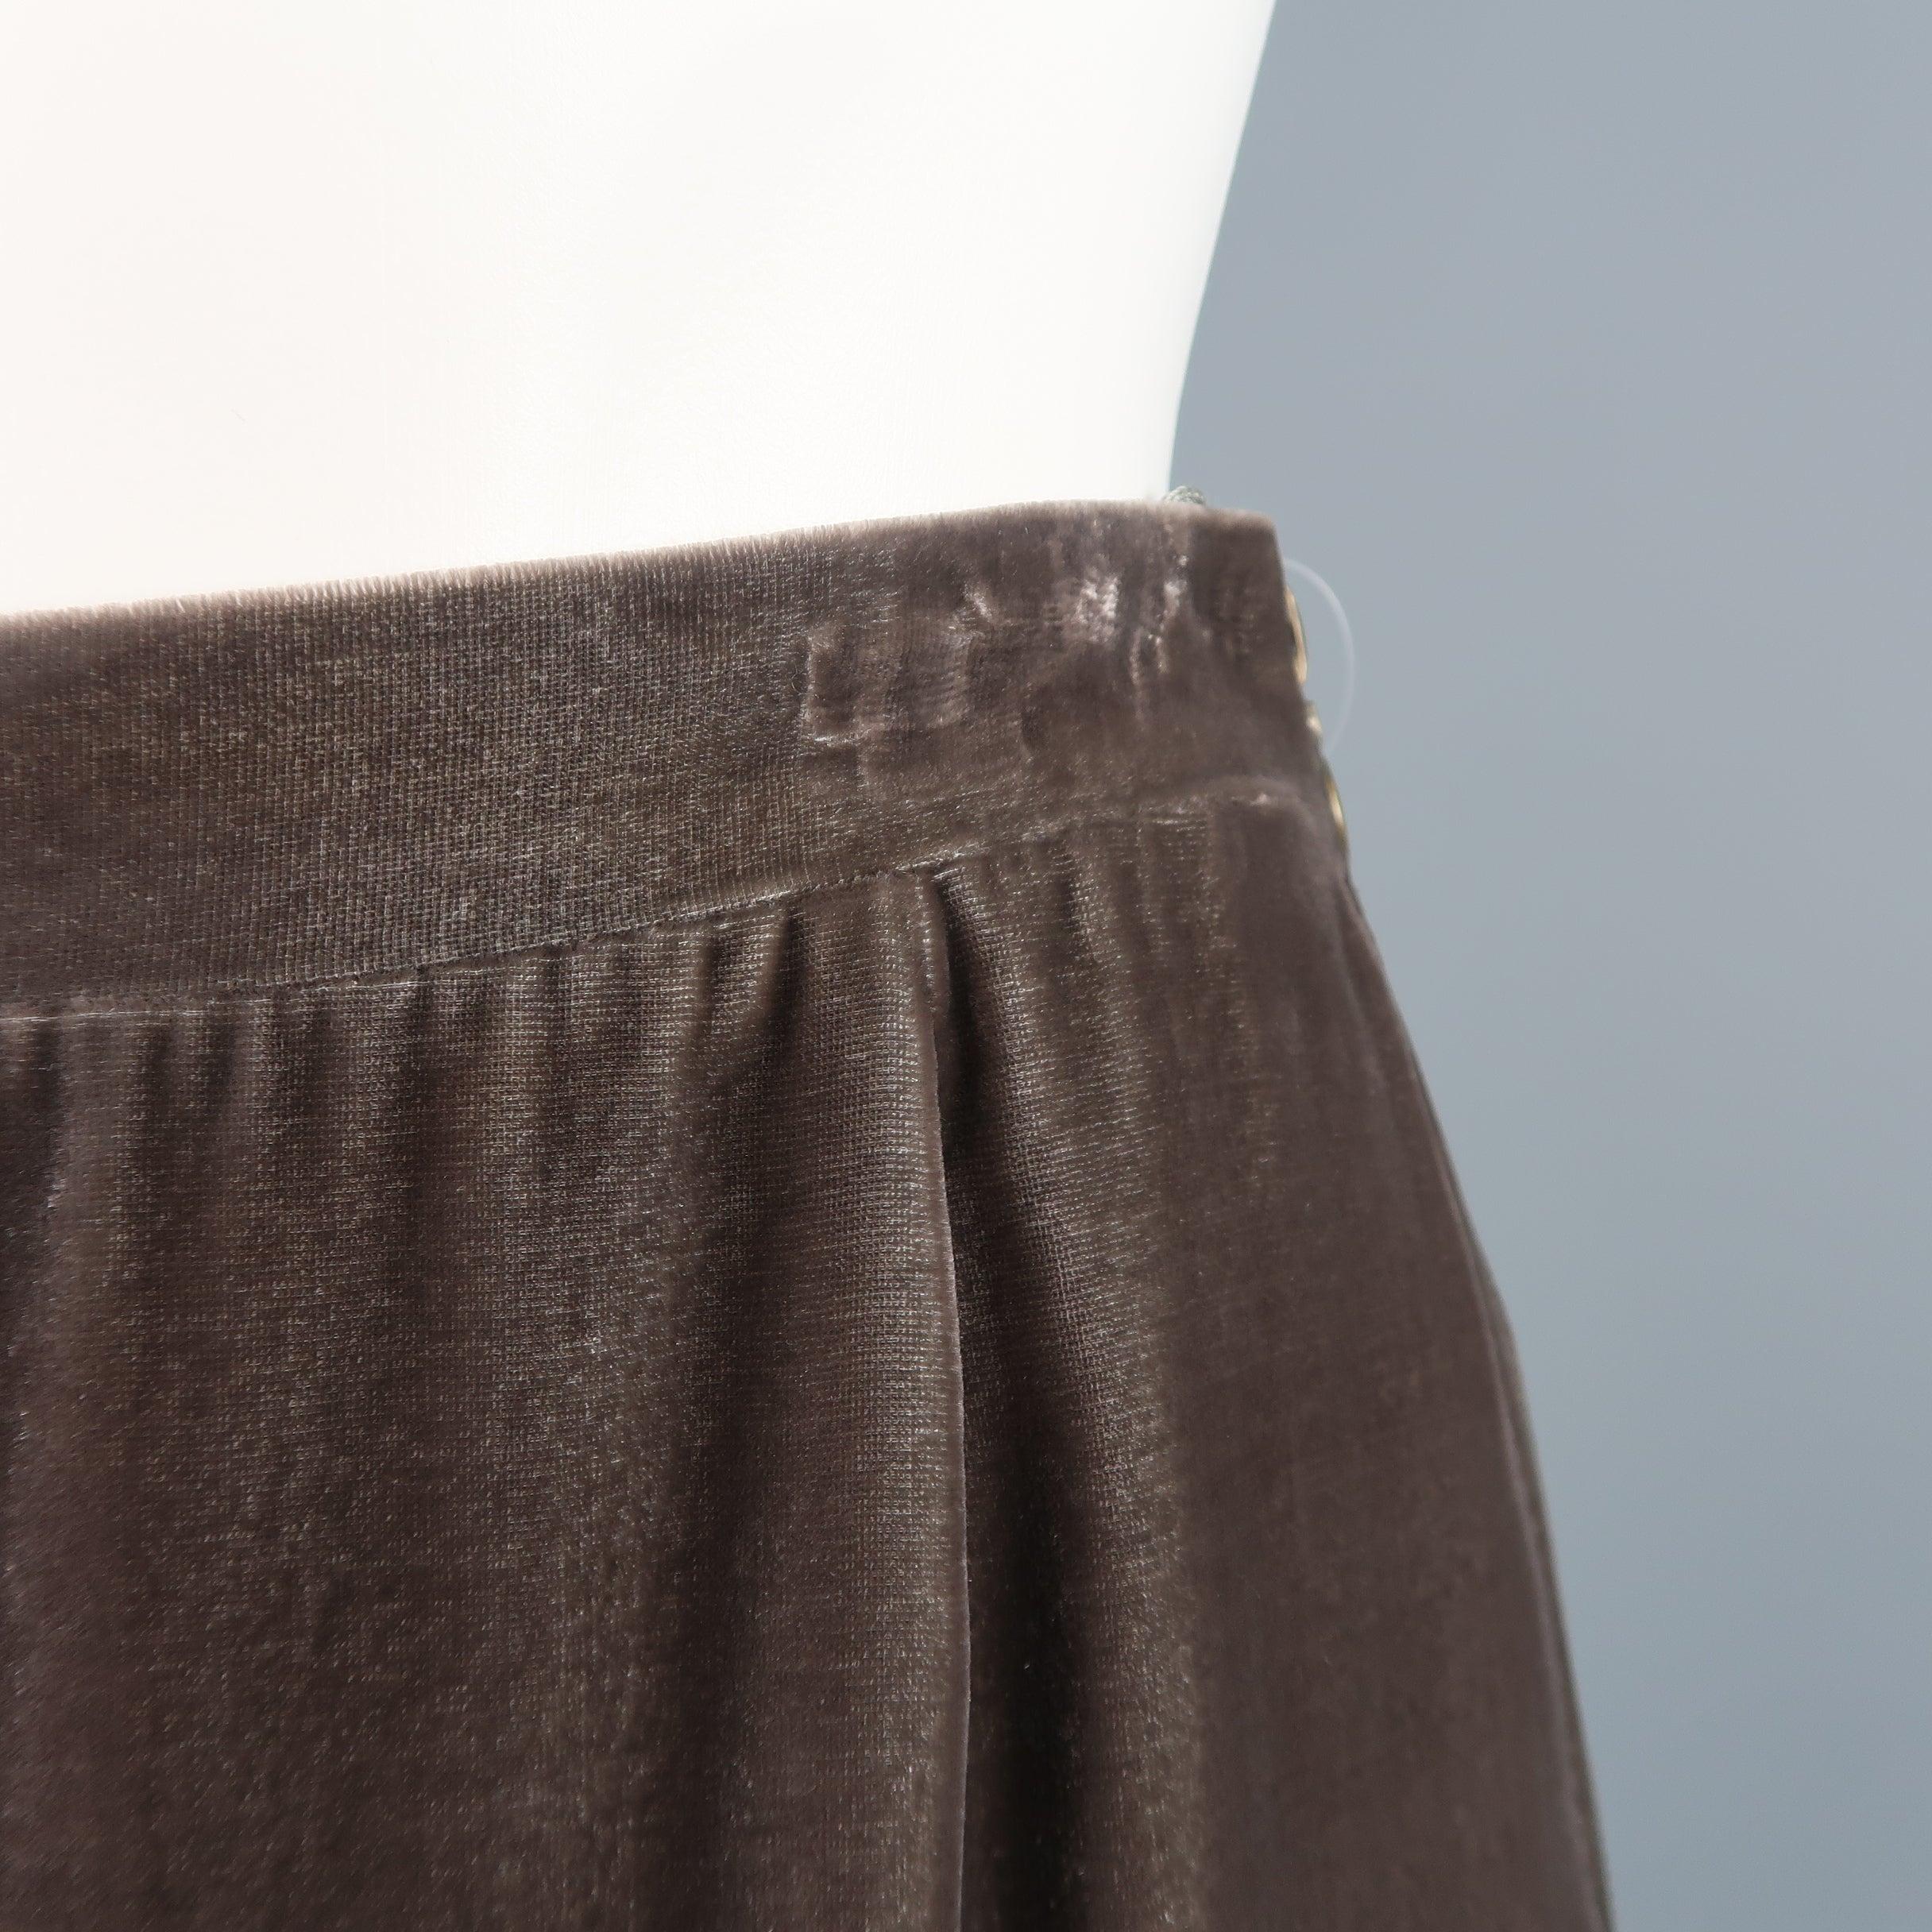 MISSONI pencil skirt comes in taupe gray silk blend velvet with a gathered front, and double dark gold tone zip sides. With Tags. Minor imperfections from hanger and tags. As-is. Made in Italy.Fair Pre-Owned Condition. 

Marked:   IT 40